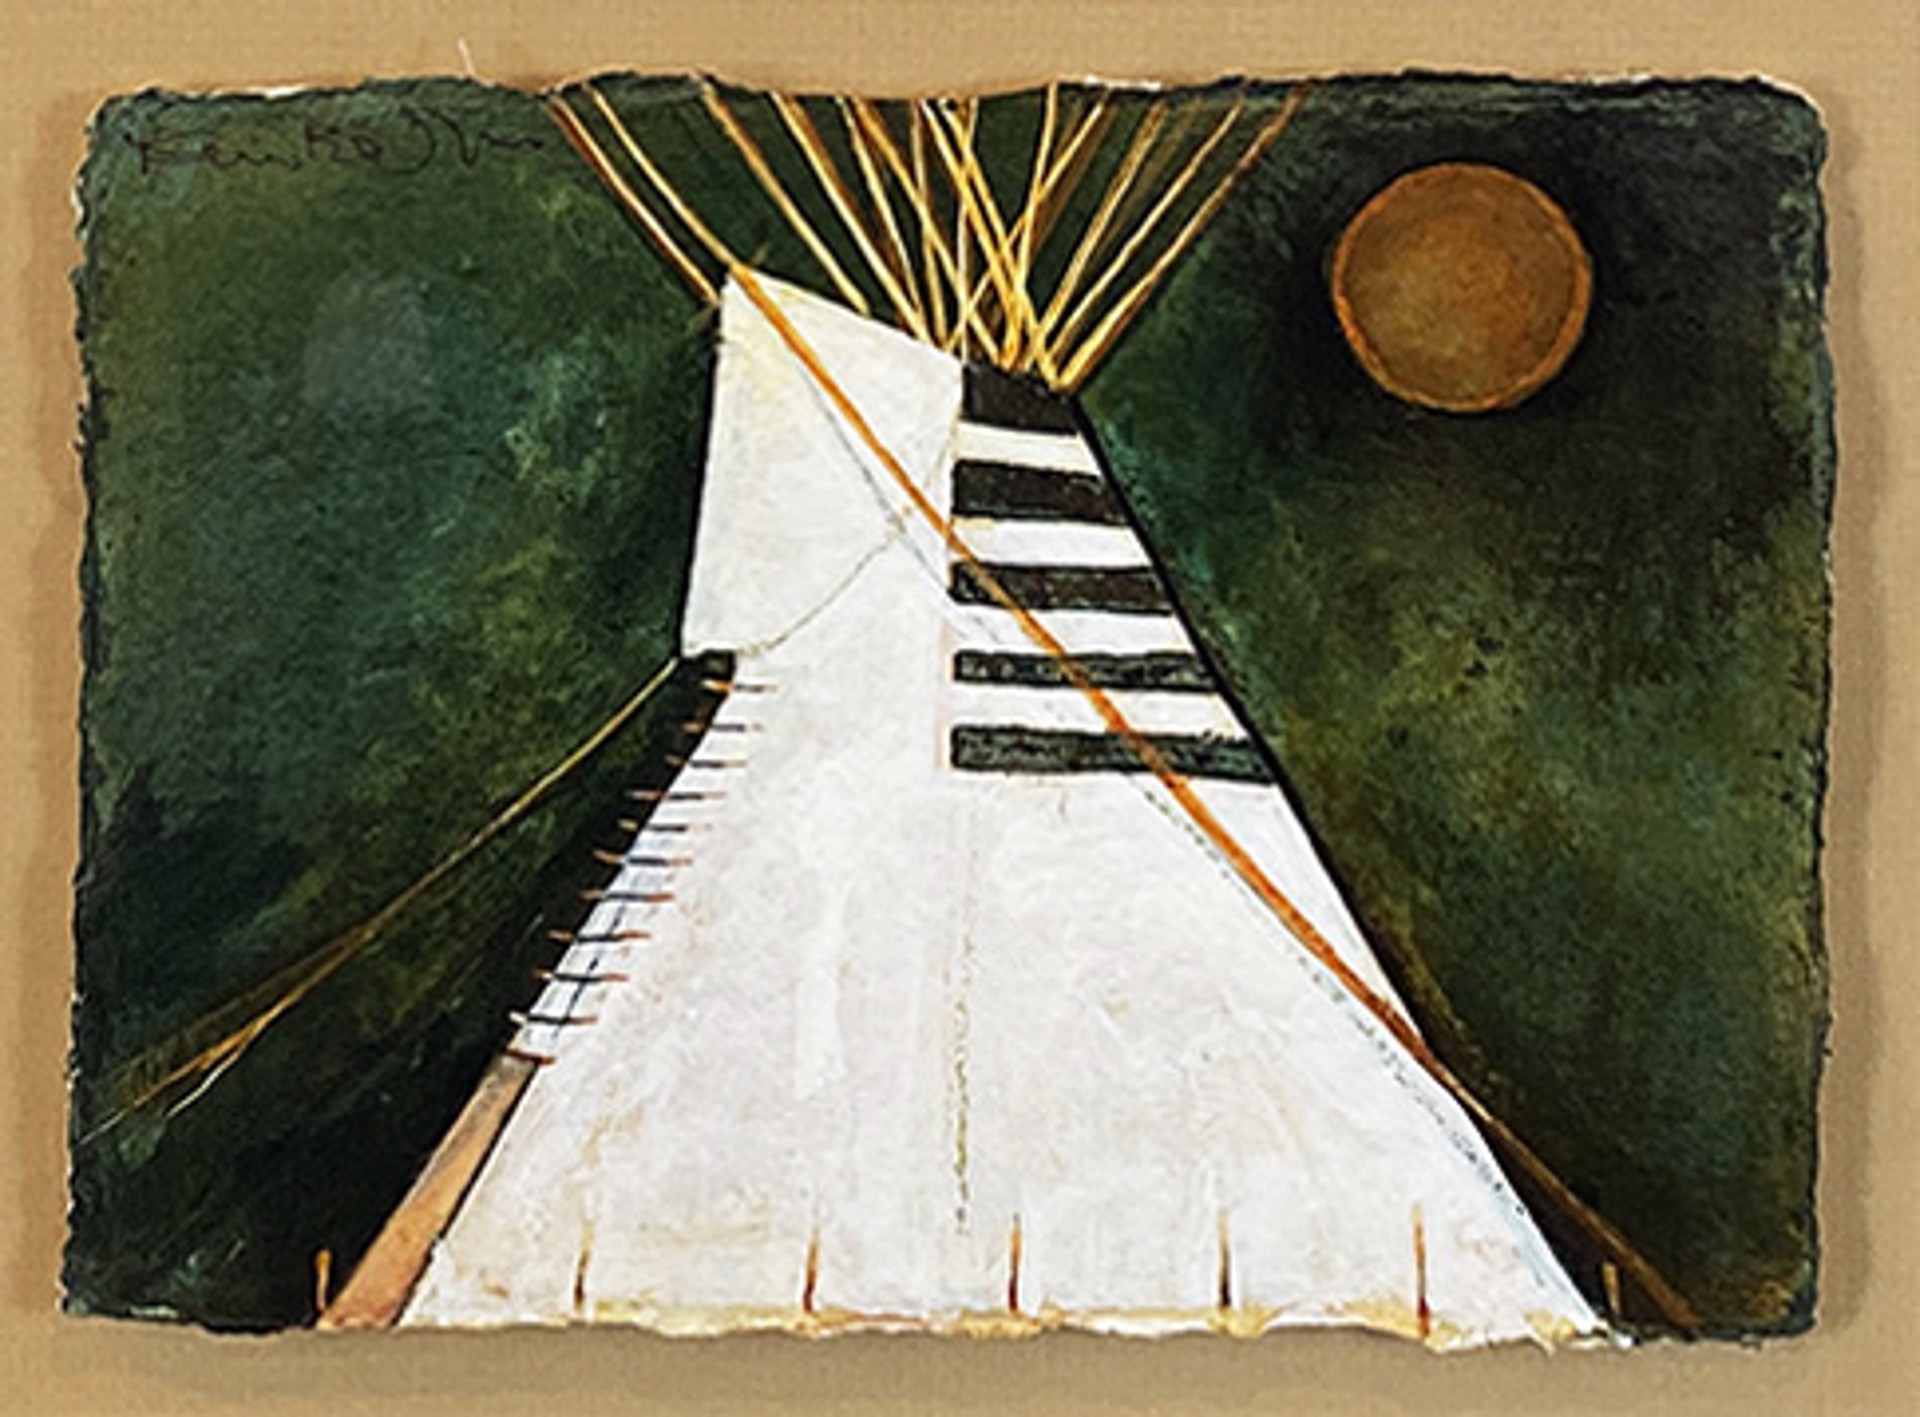 Moonlit Teepee by Kevin Red Star